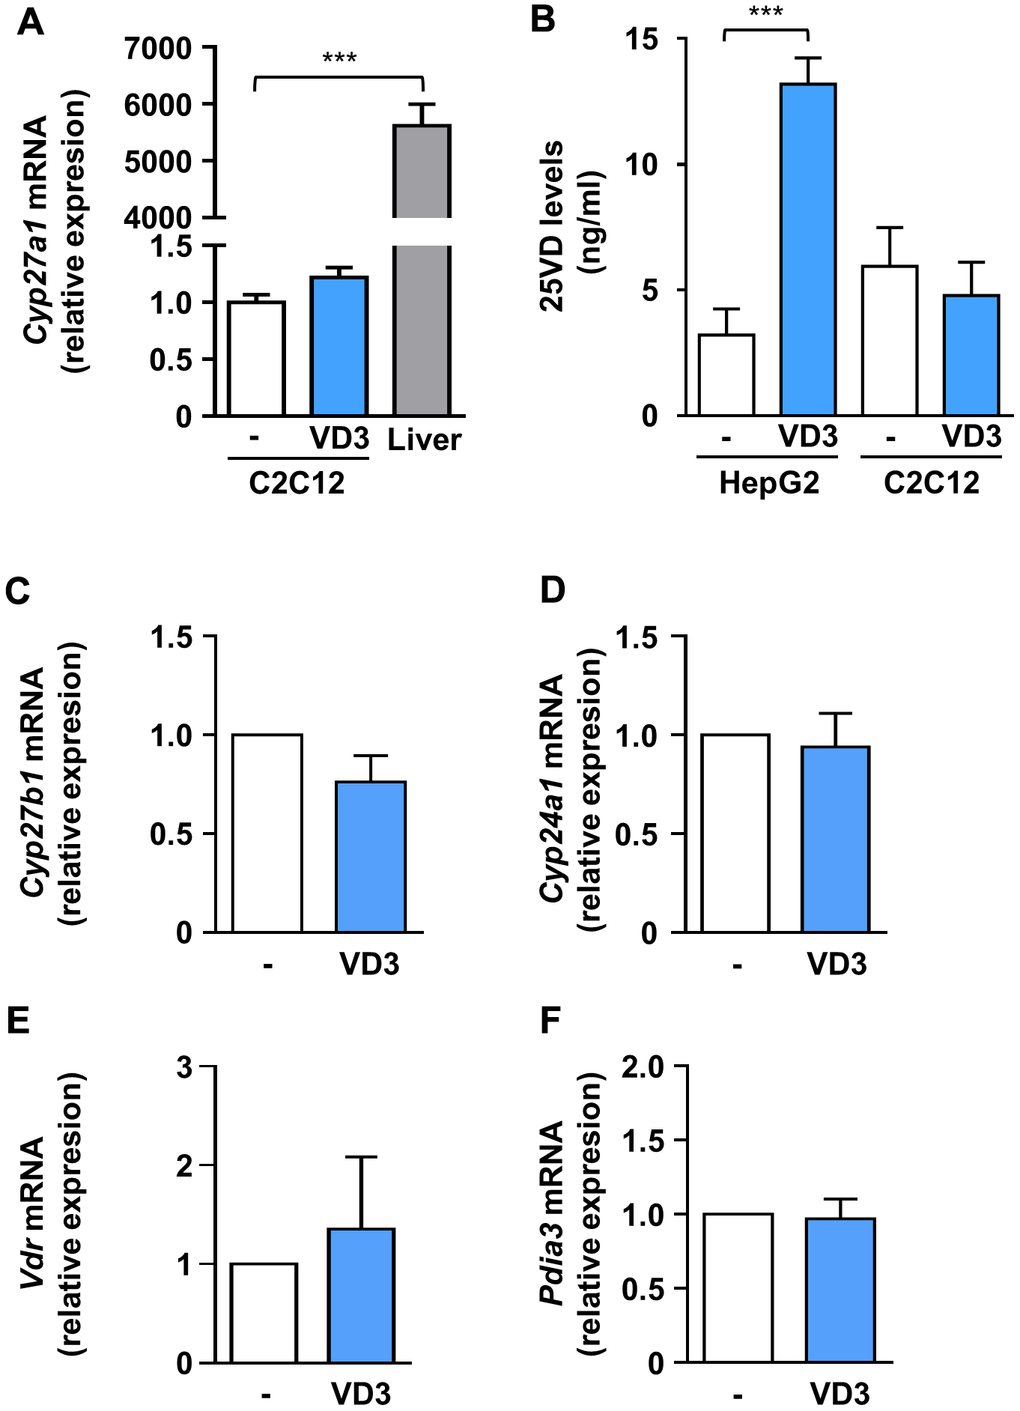 VD3 did not alter the expression of hydroxylases and receptors involved in vitamin D metabolism and activity, and its anti-atrophic action does not depend on intracellular conversion to 25VD. (A) C2C12 myotubes were treated in serum-free medium with VD3 for 24 h, and mRNA levels of Cyp27a1 were assayed by real-time PCR, using liver tissue as a positive control and Gusb as the housekeeping gene. (B) HepG2 cells and C2C12 myotubes were treated in serum-free medium with VD3 for 24 h, and the content of 25VD was quantified in cell lysates with a specific ELISA kit. (C–F) C2C12 myotubes were treated in serum-free medium as above, and mRNA levels of (C) Cyp27b1, (D) Cyp24a1, (E) Vdr, and (F) Pdia3 were assayed by real-time PCR, using Gusb as the housekeeping gene. Data are presented as the mean ± SEM of three independent experiments. ***P 